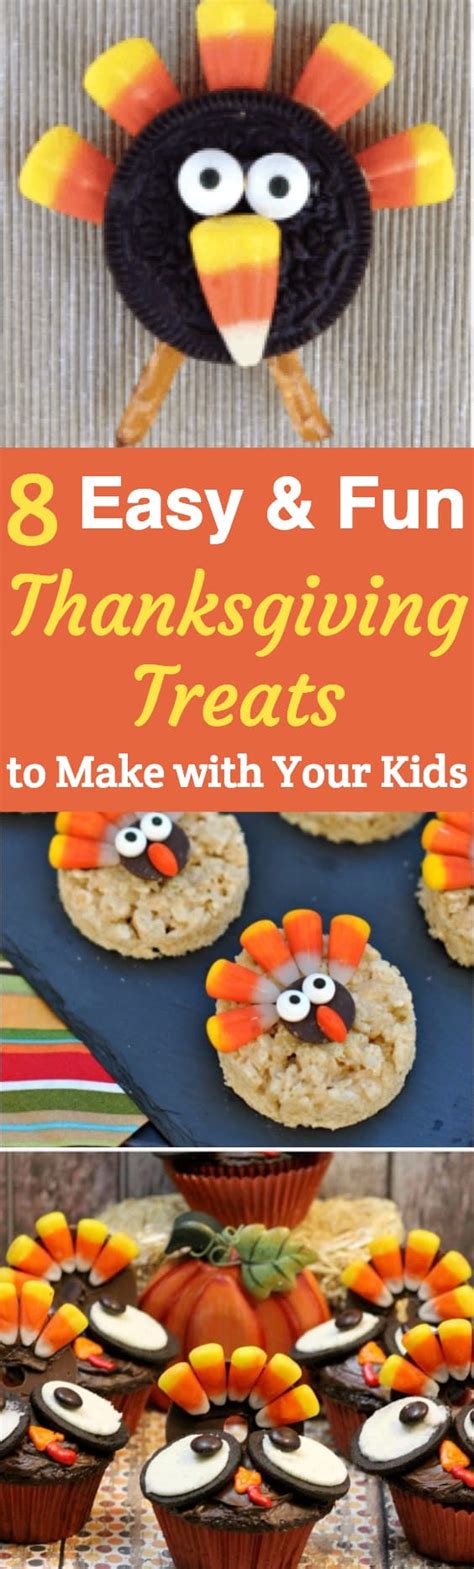 The kids are the ones that will be the happiest for such treats, so you can try to be more creative. Thanksgiving Desserts Kids Love - 8 Fun & Easy Kid-Approved Desserts